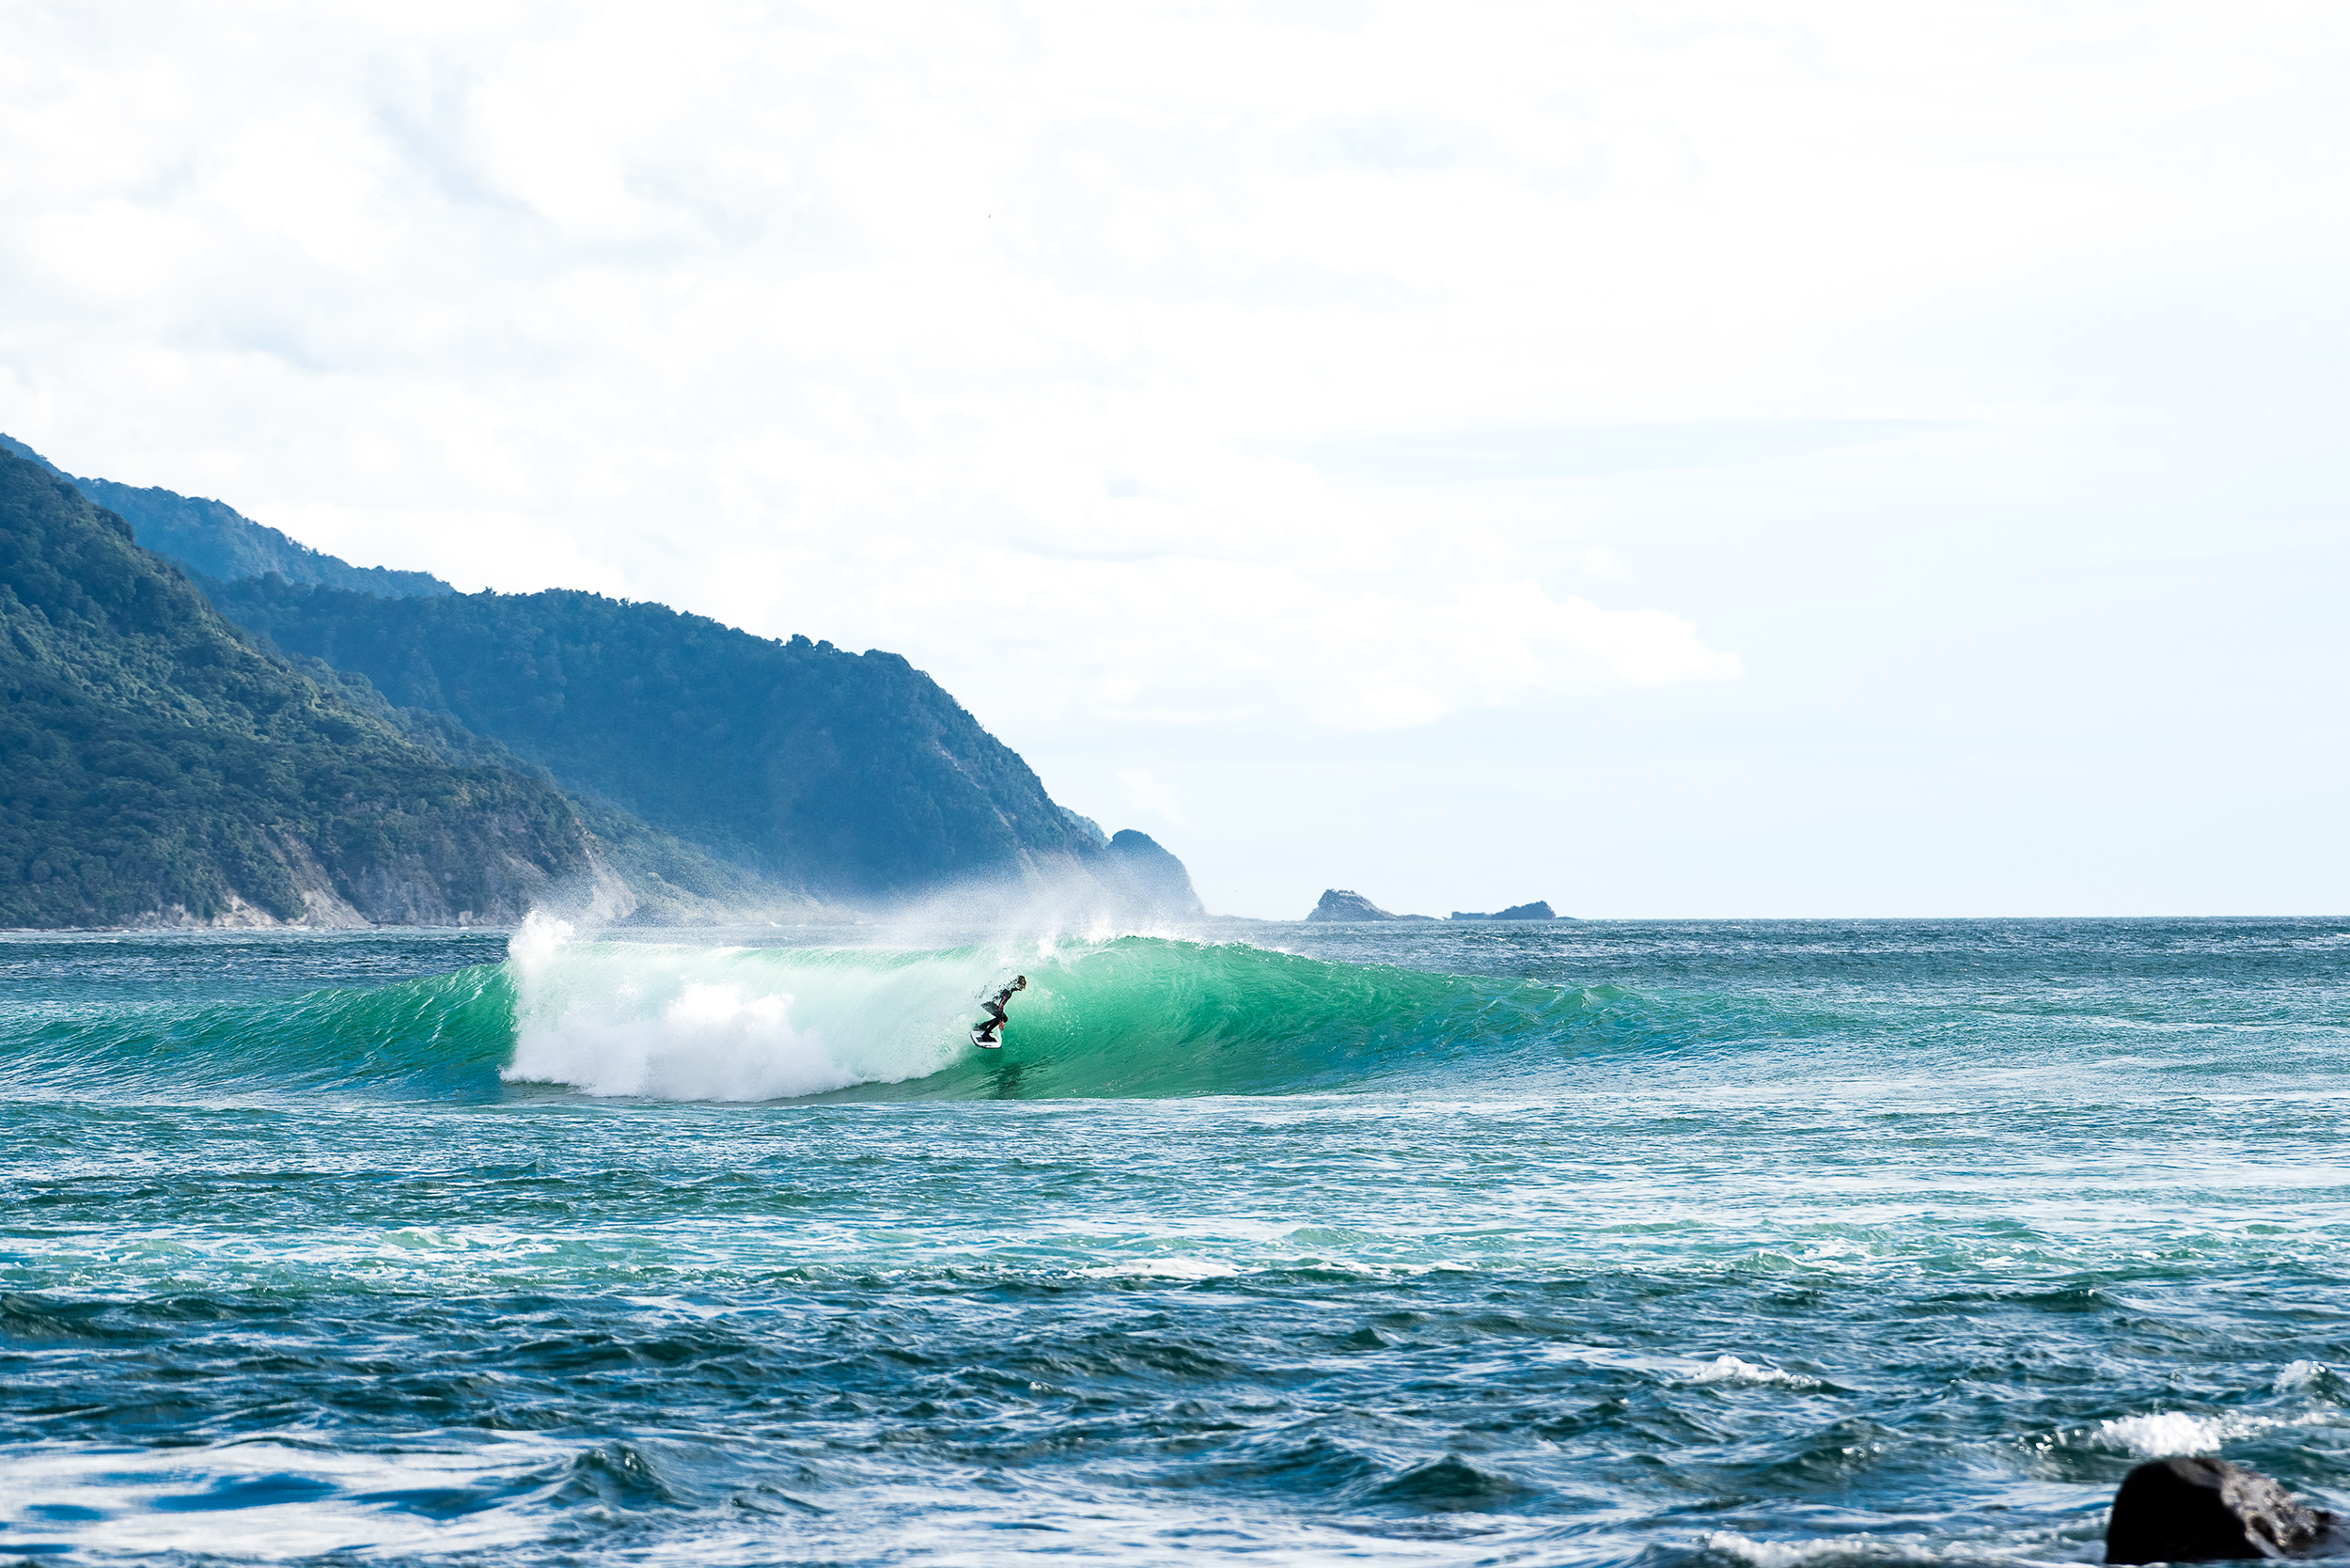 Surfing New Zealand's South Island